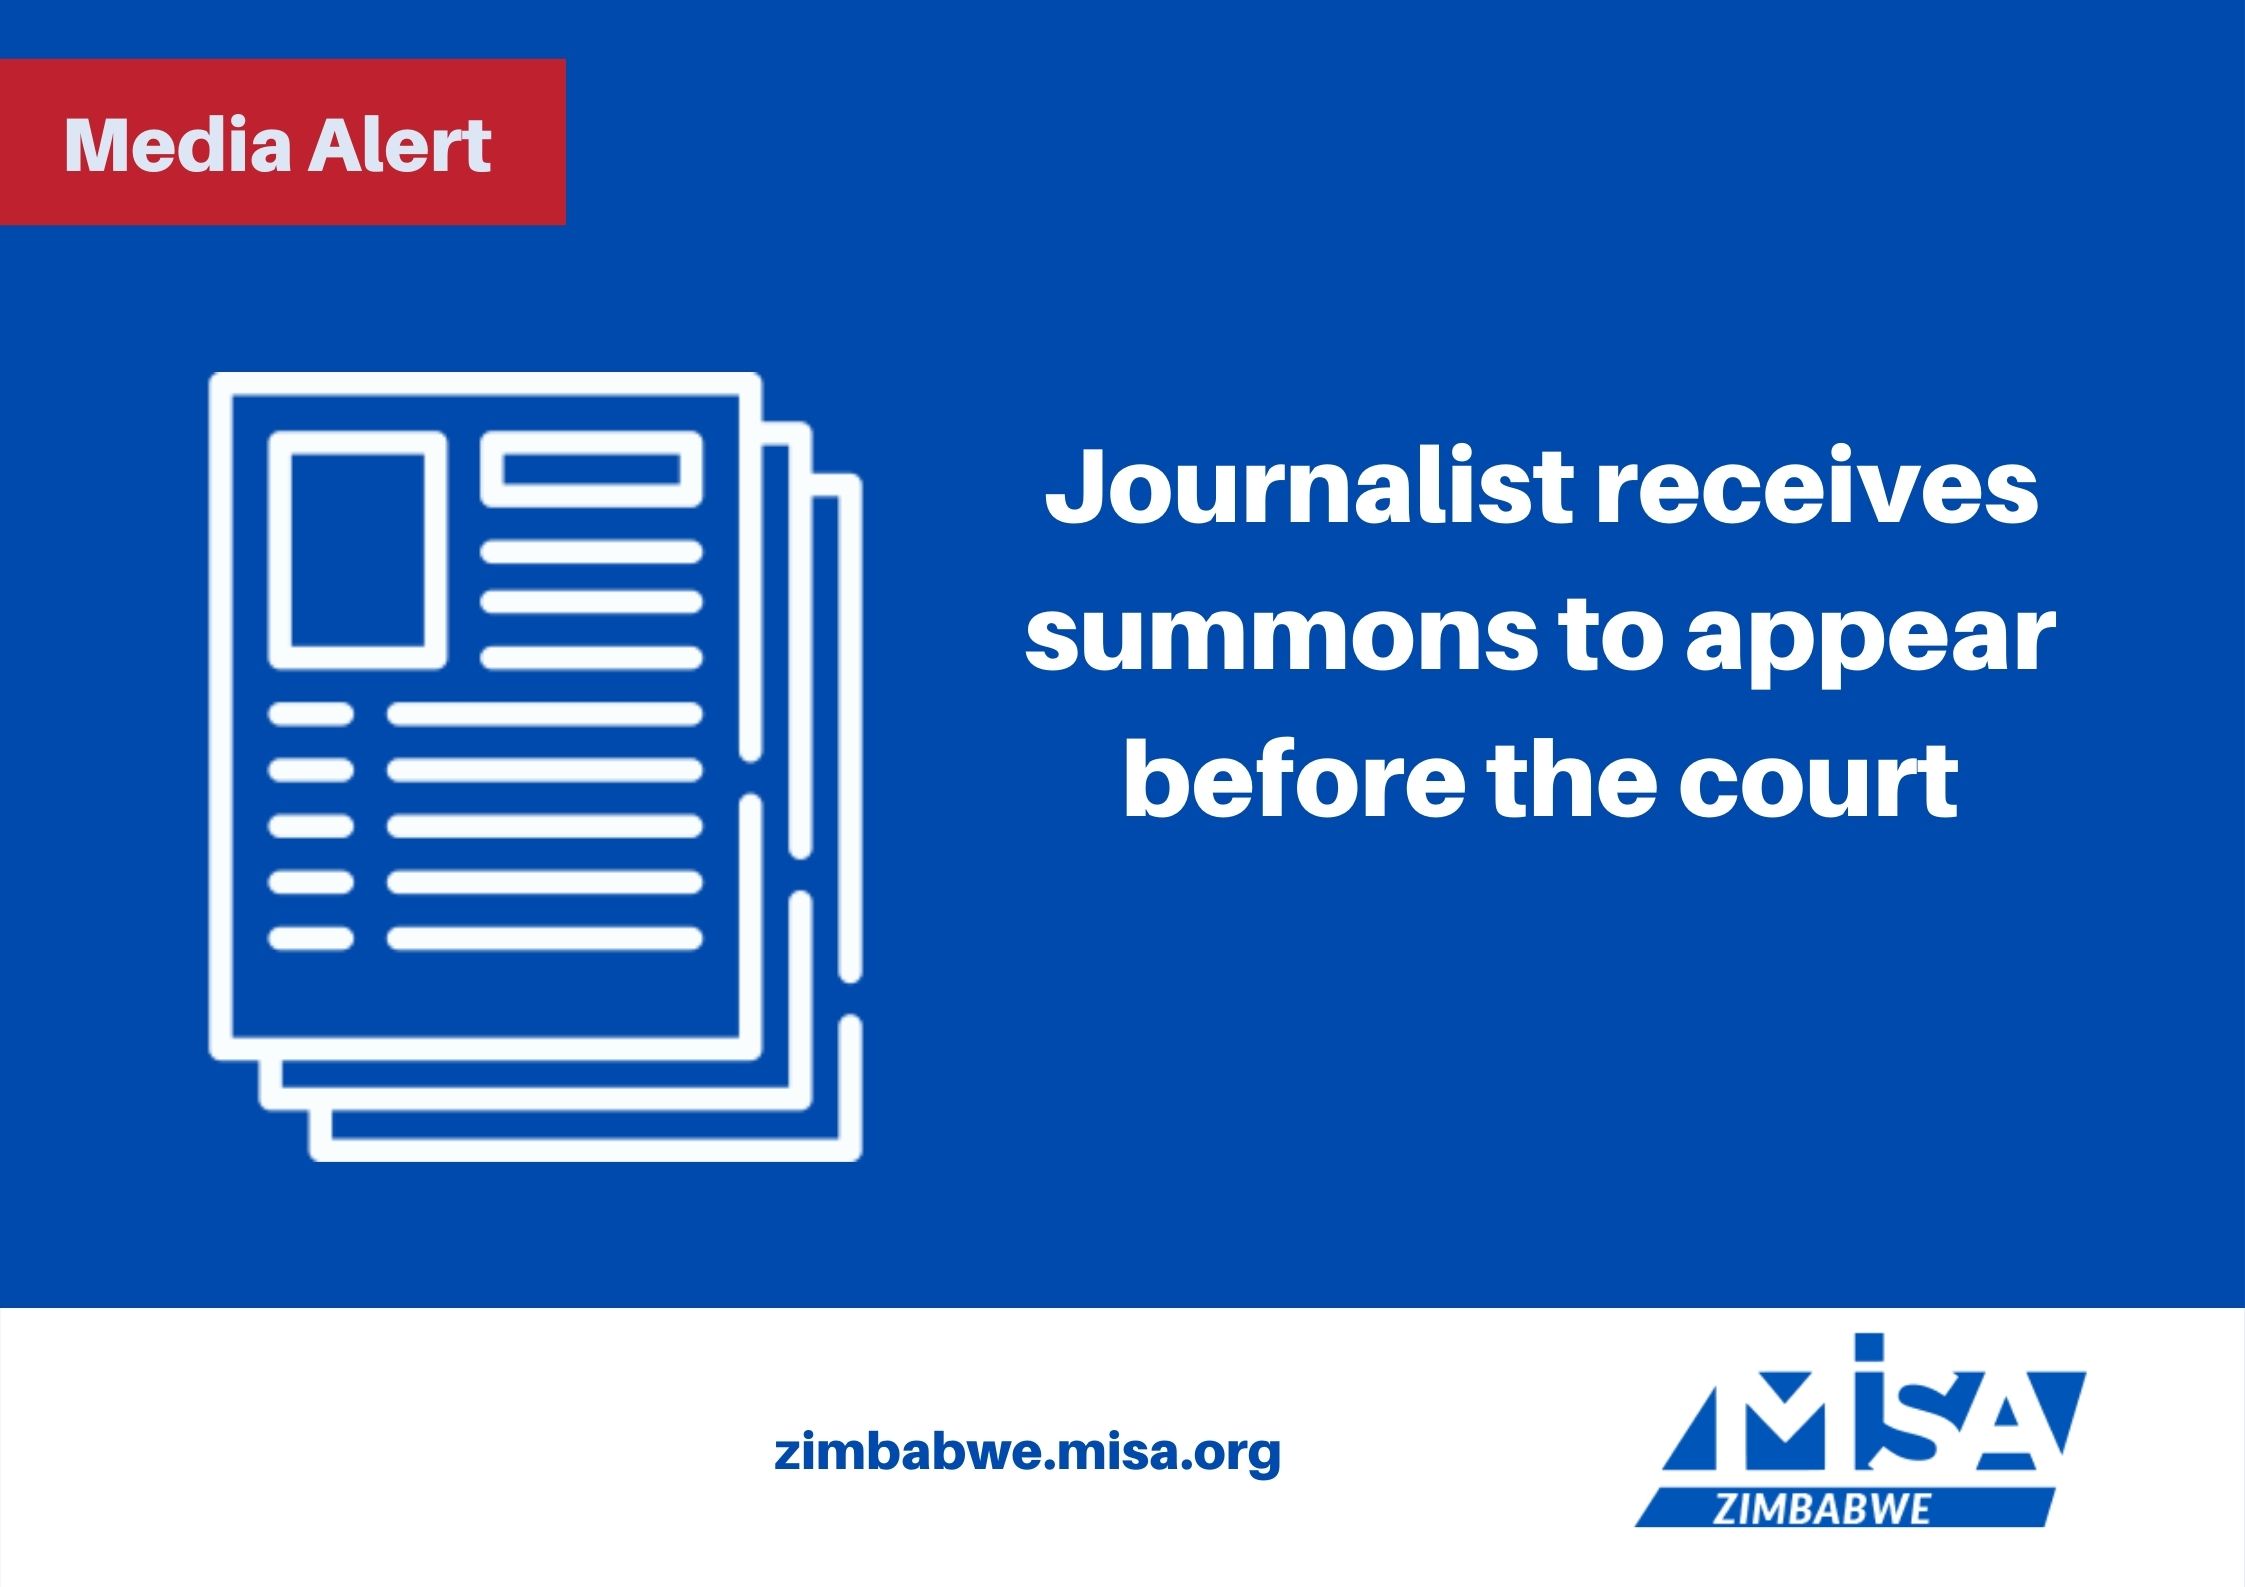 Journalist receives summons to appear before the court